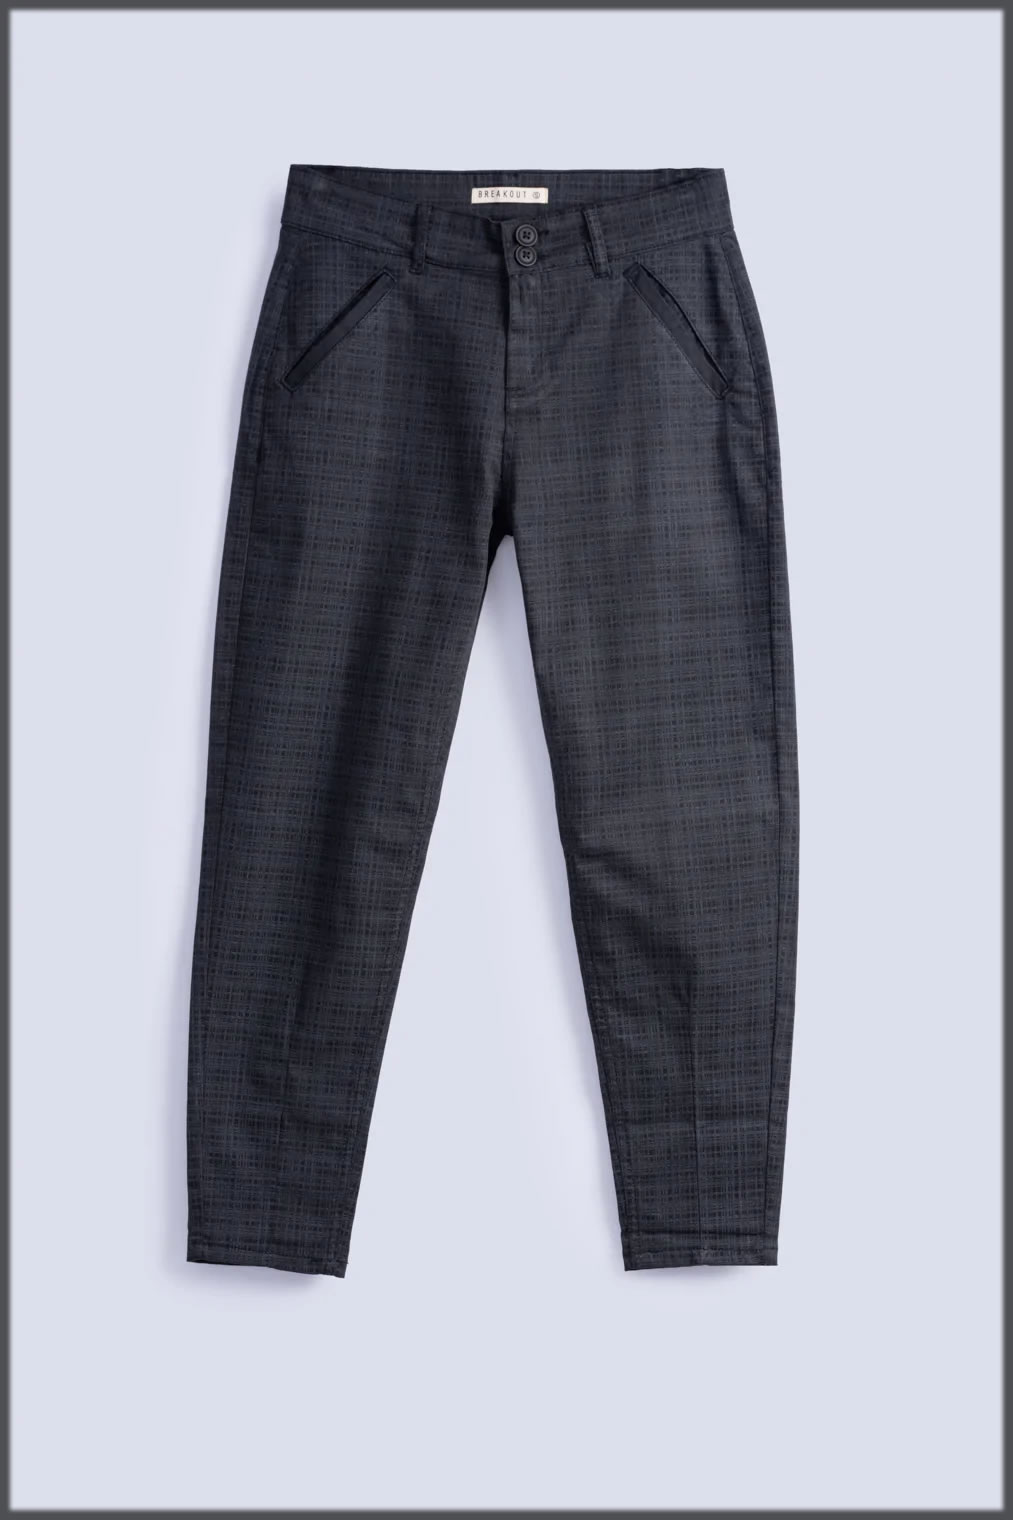 breakout winter pant collection